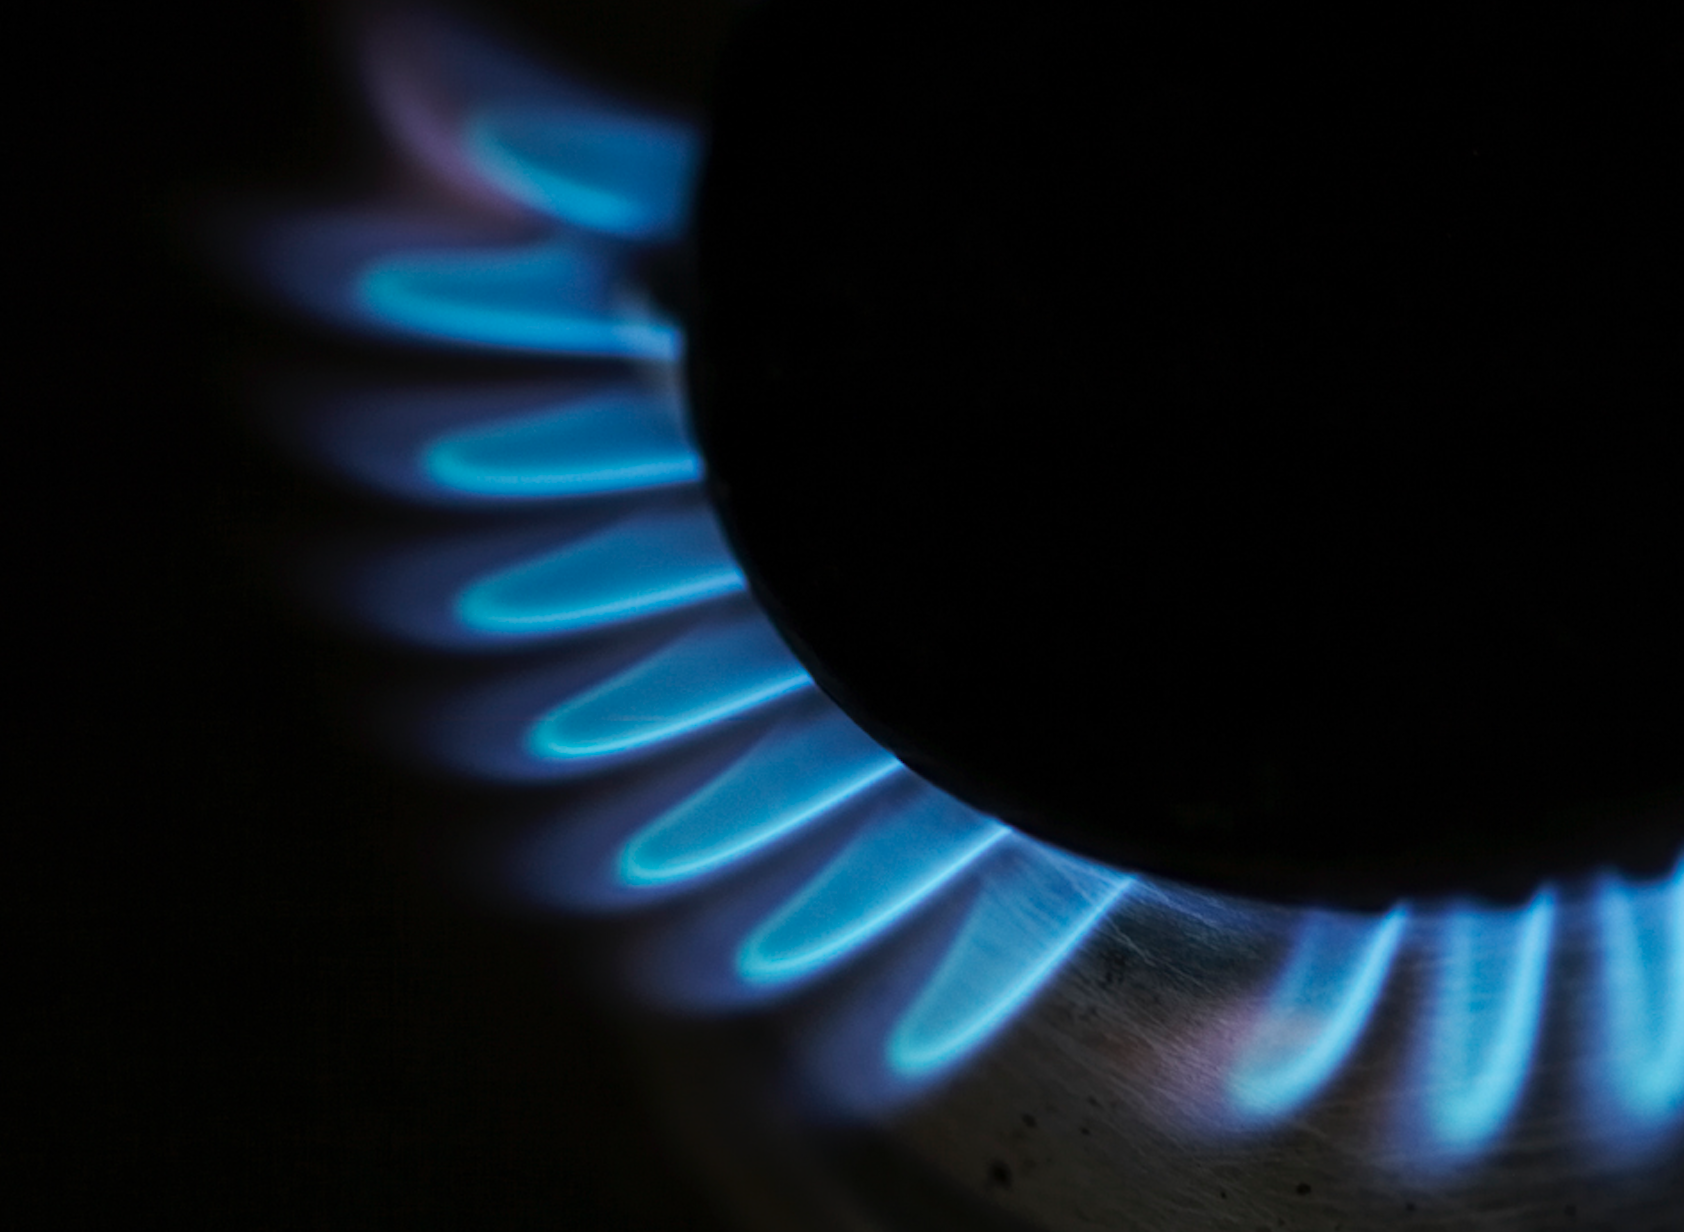 UK Fuel Poverty Could Double In a Year